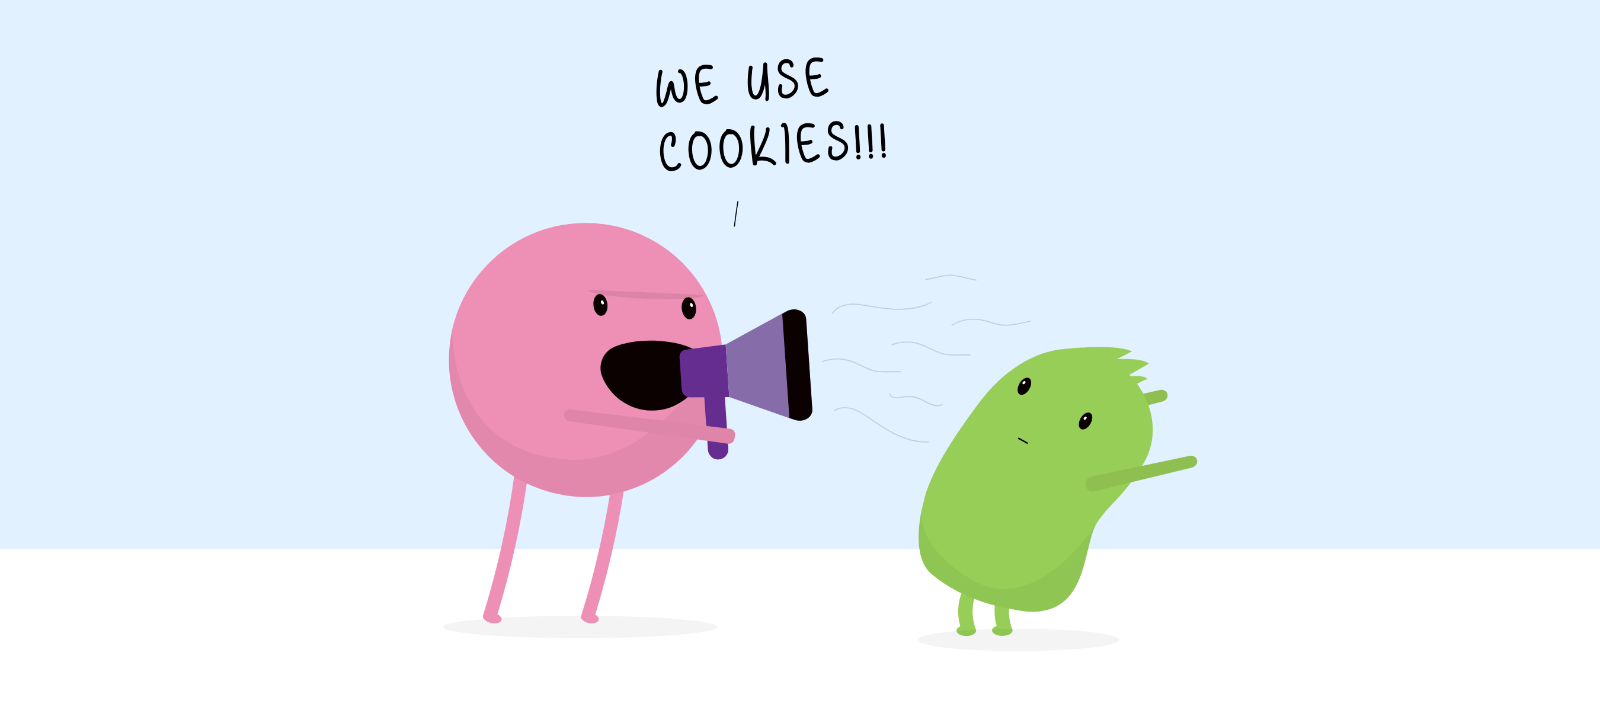 A cartoon depicting a large blob character shouting 'WE USE COOKIES!!!' at a small, shocked-looking blob character